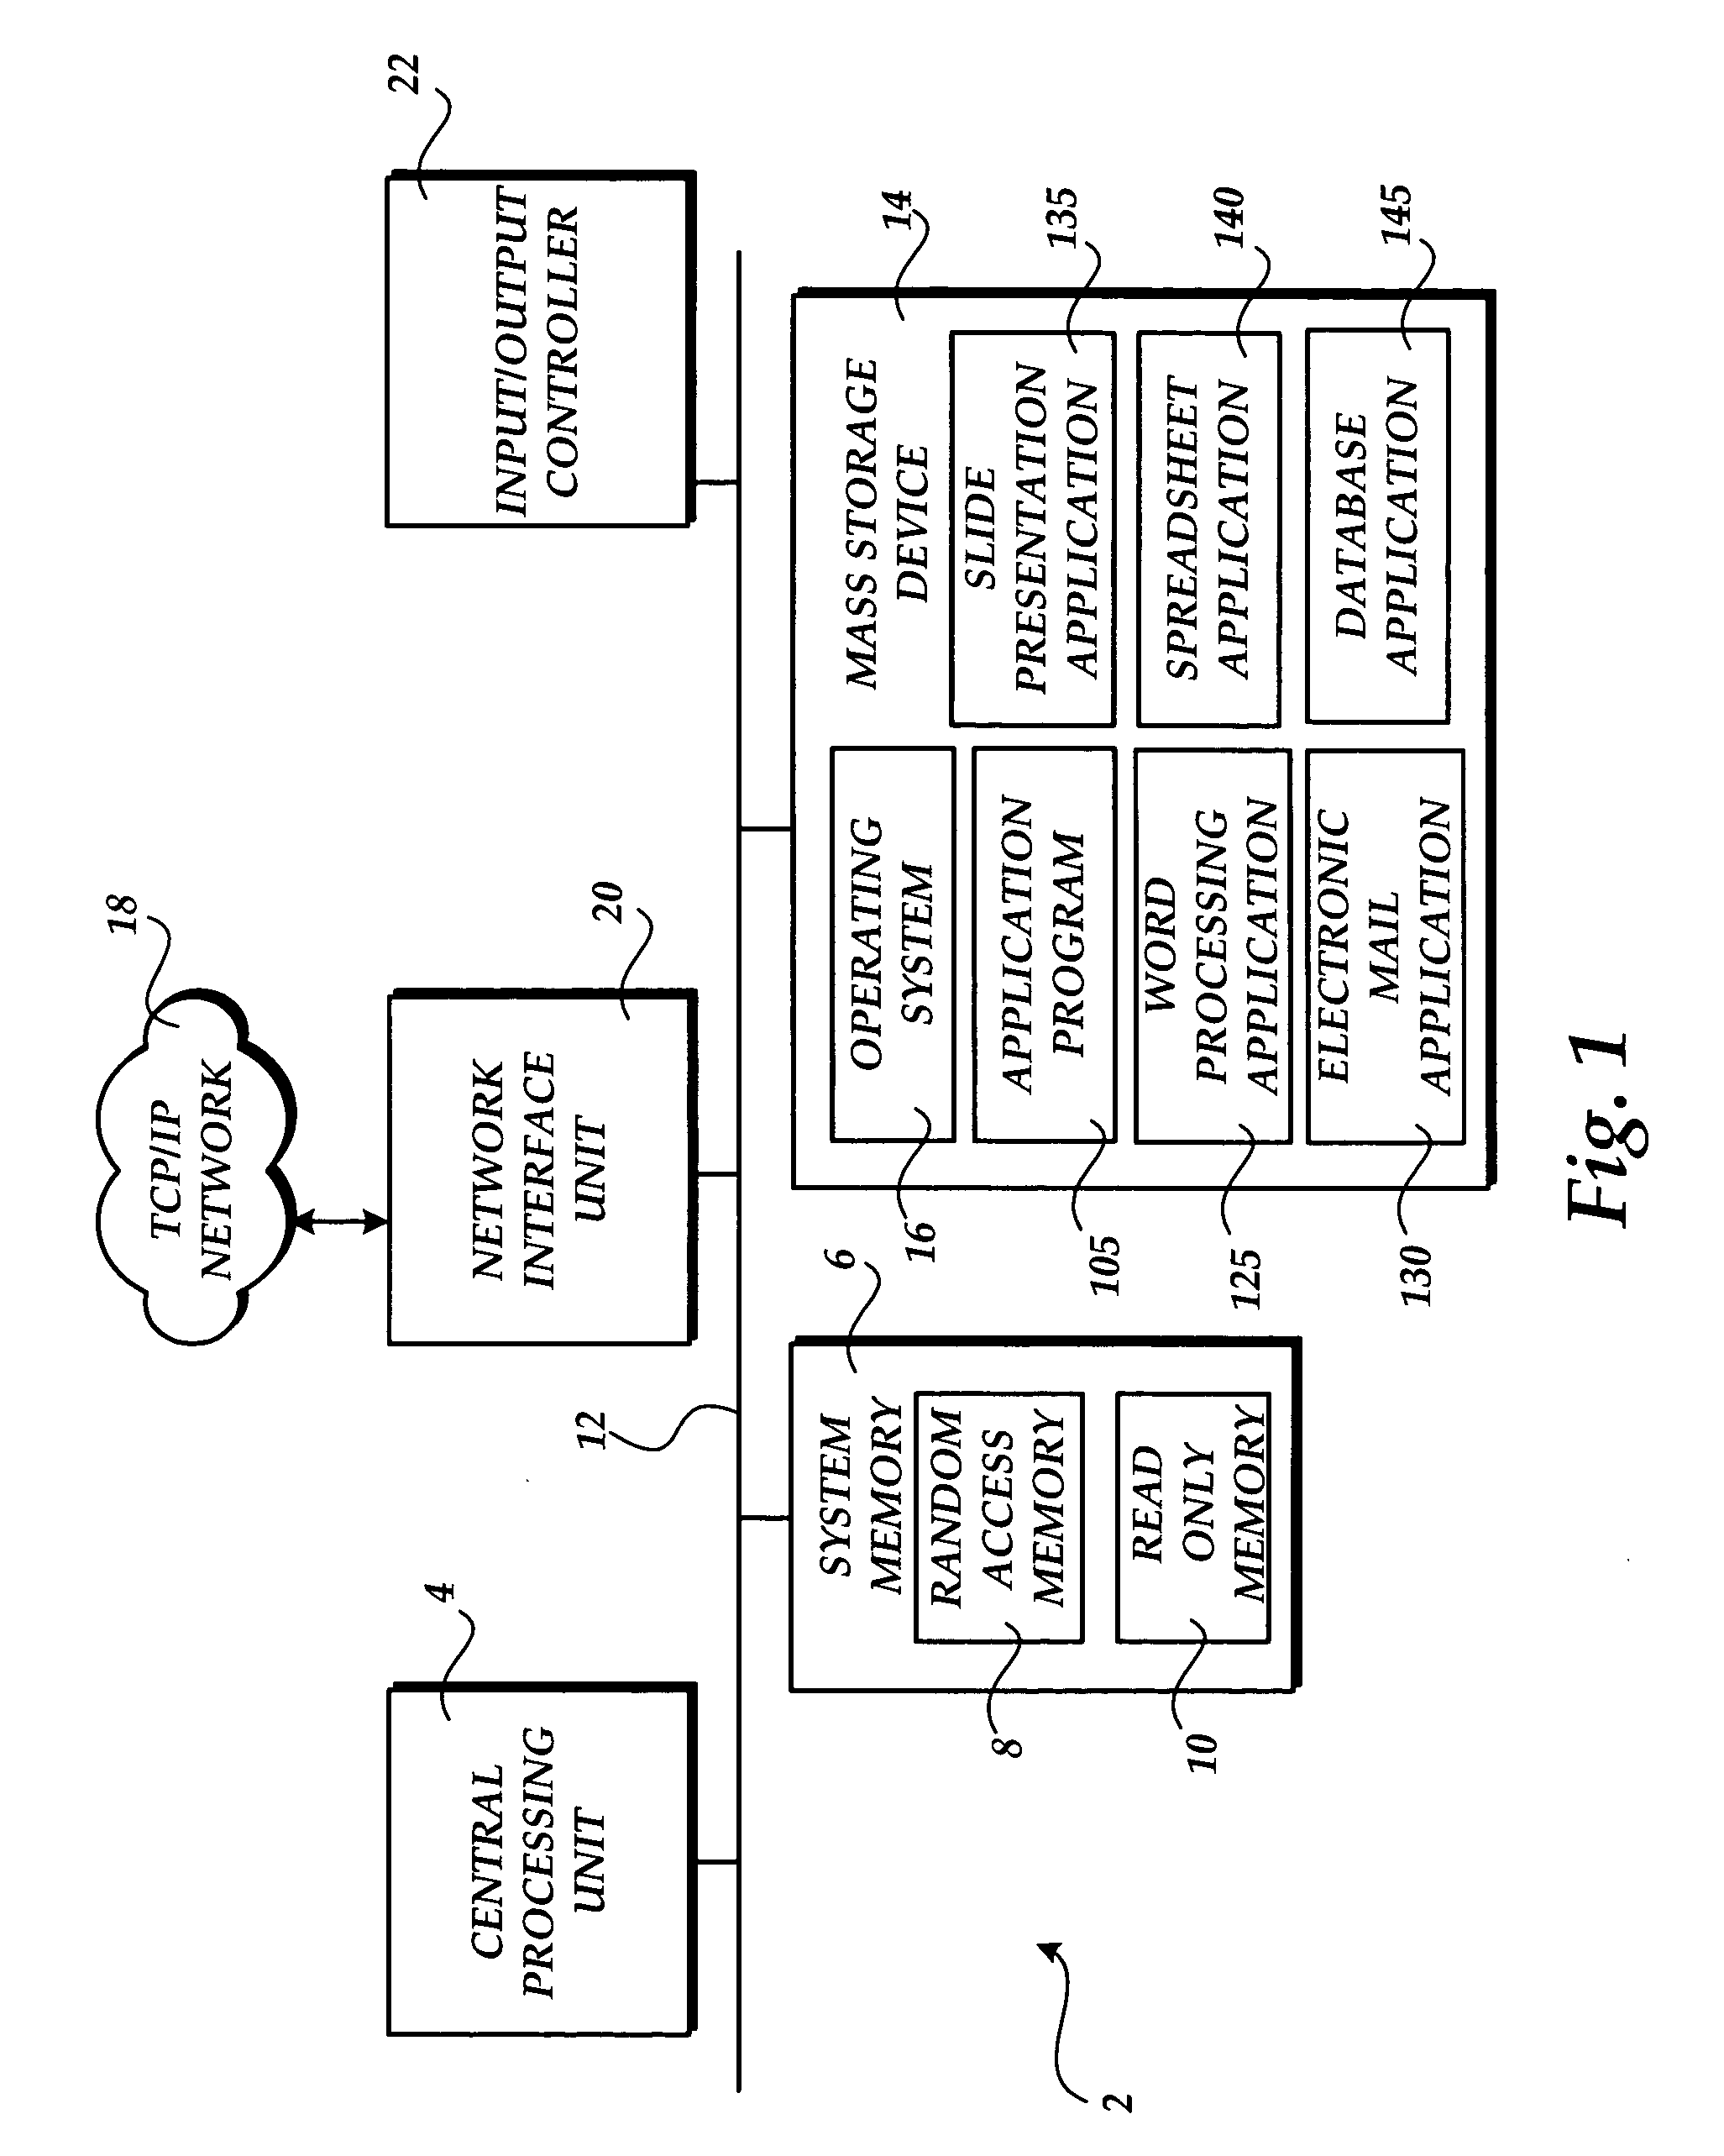 User interface for displaying selectable software functionality controls that are relevant to a selected object